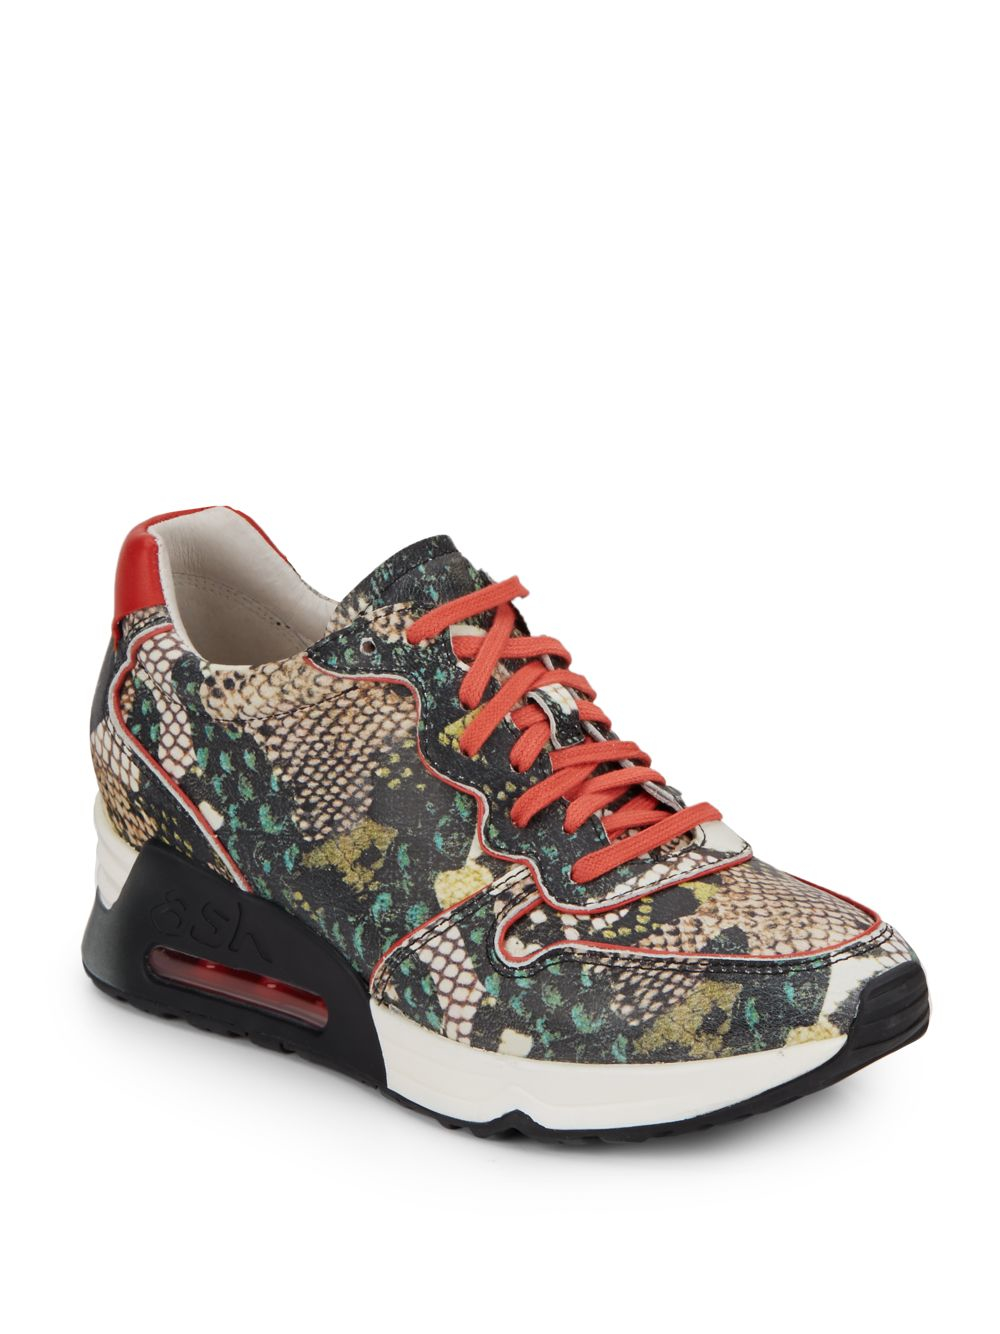 Lyst - Ash Love Snake-print Leather Sneakers